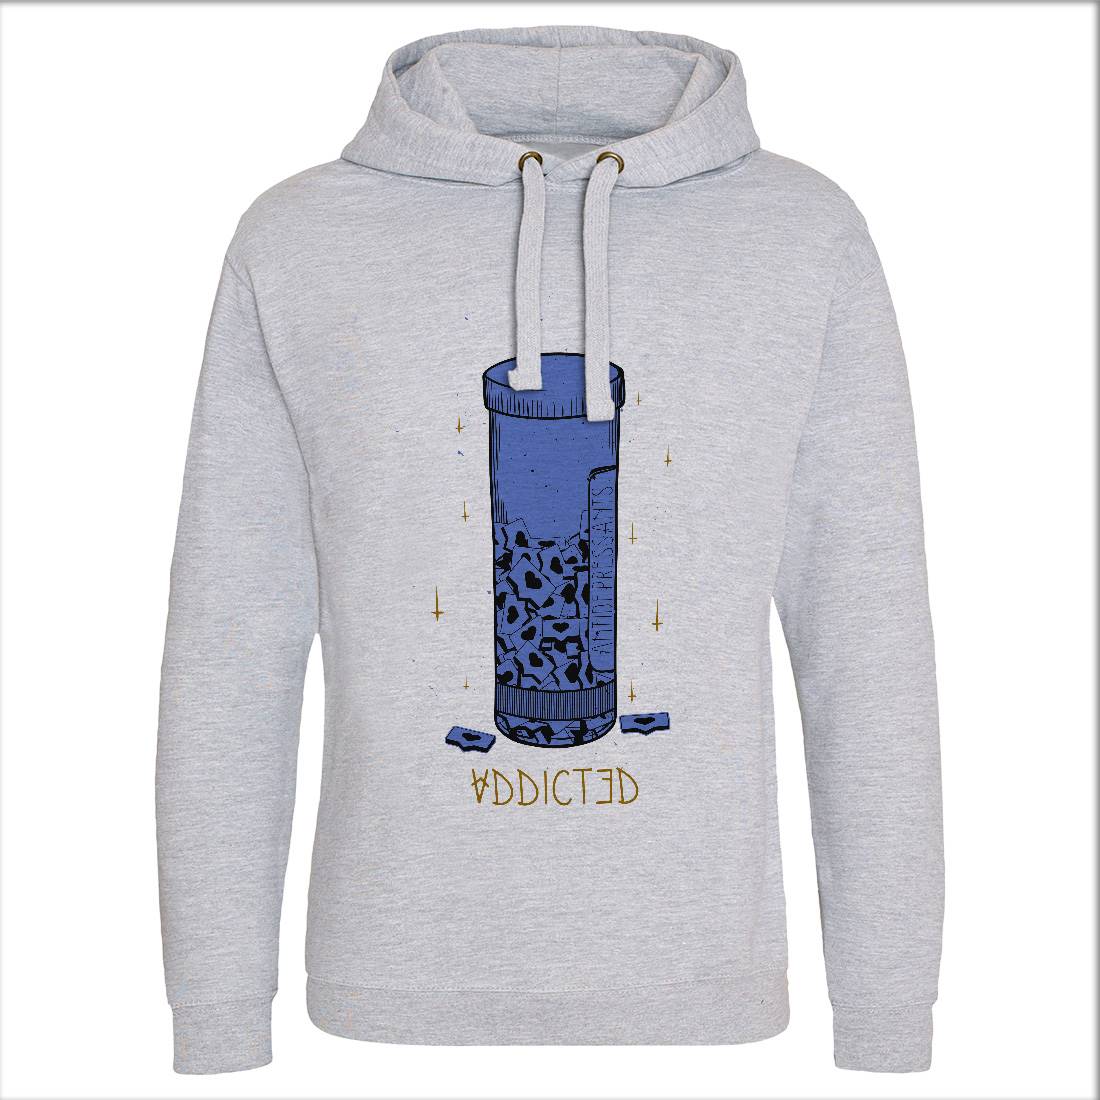 Addicted Mens Hoodie Without Pocket Media D441